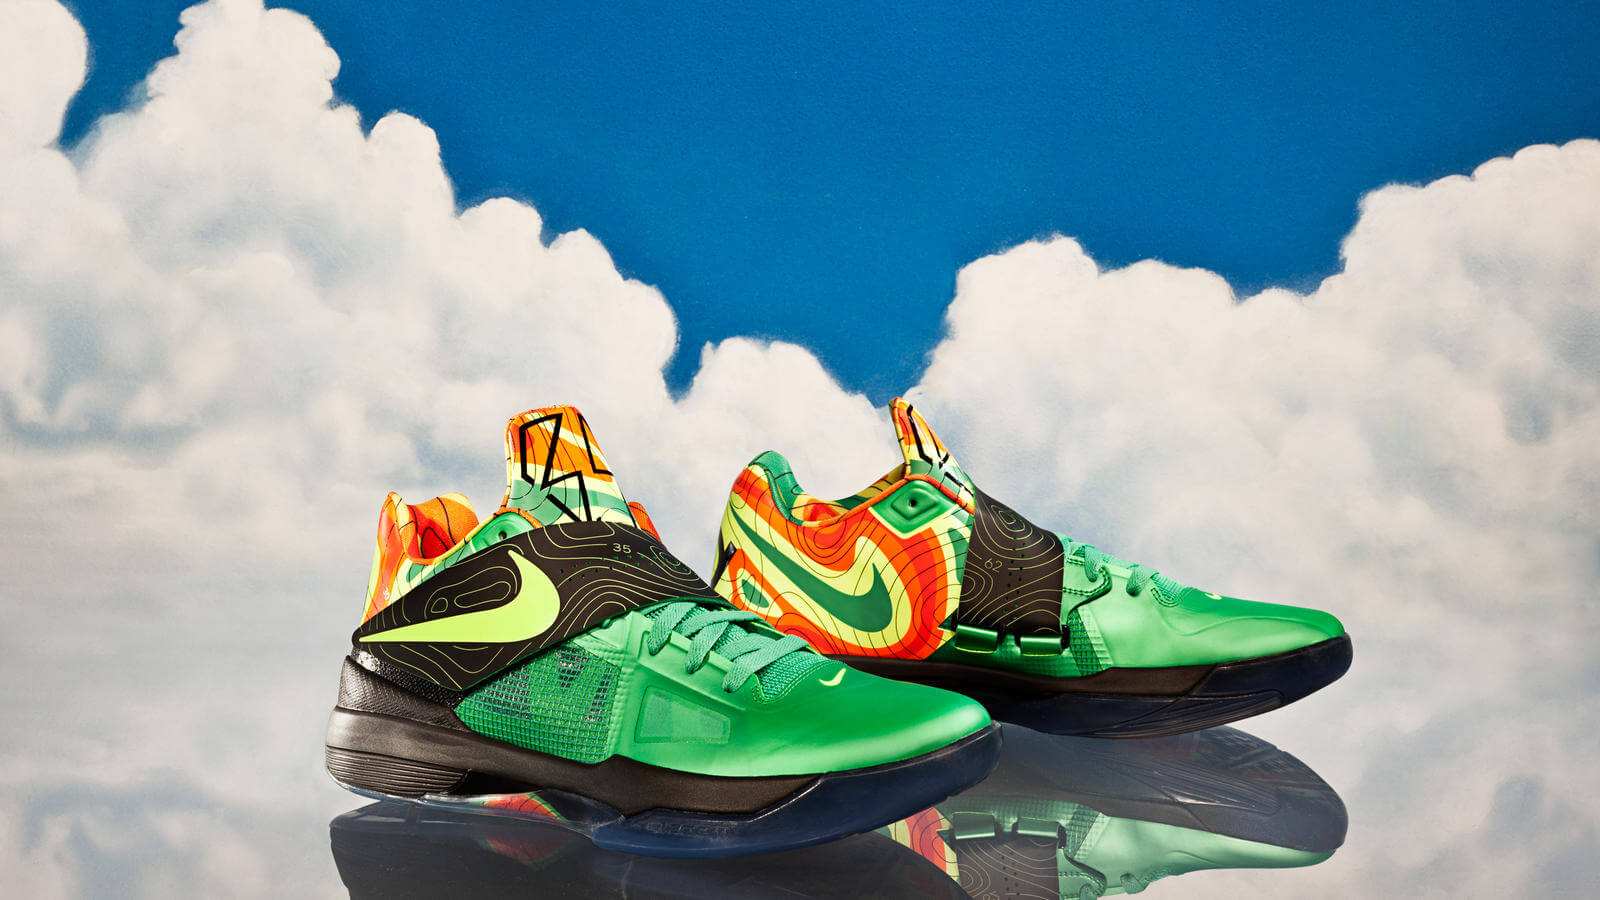 the best kd shoes